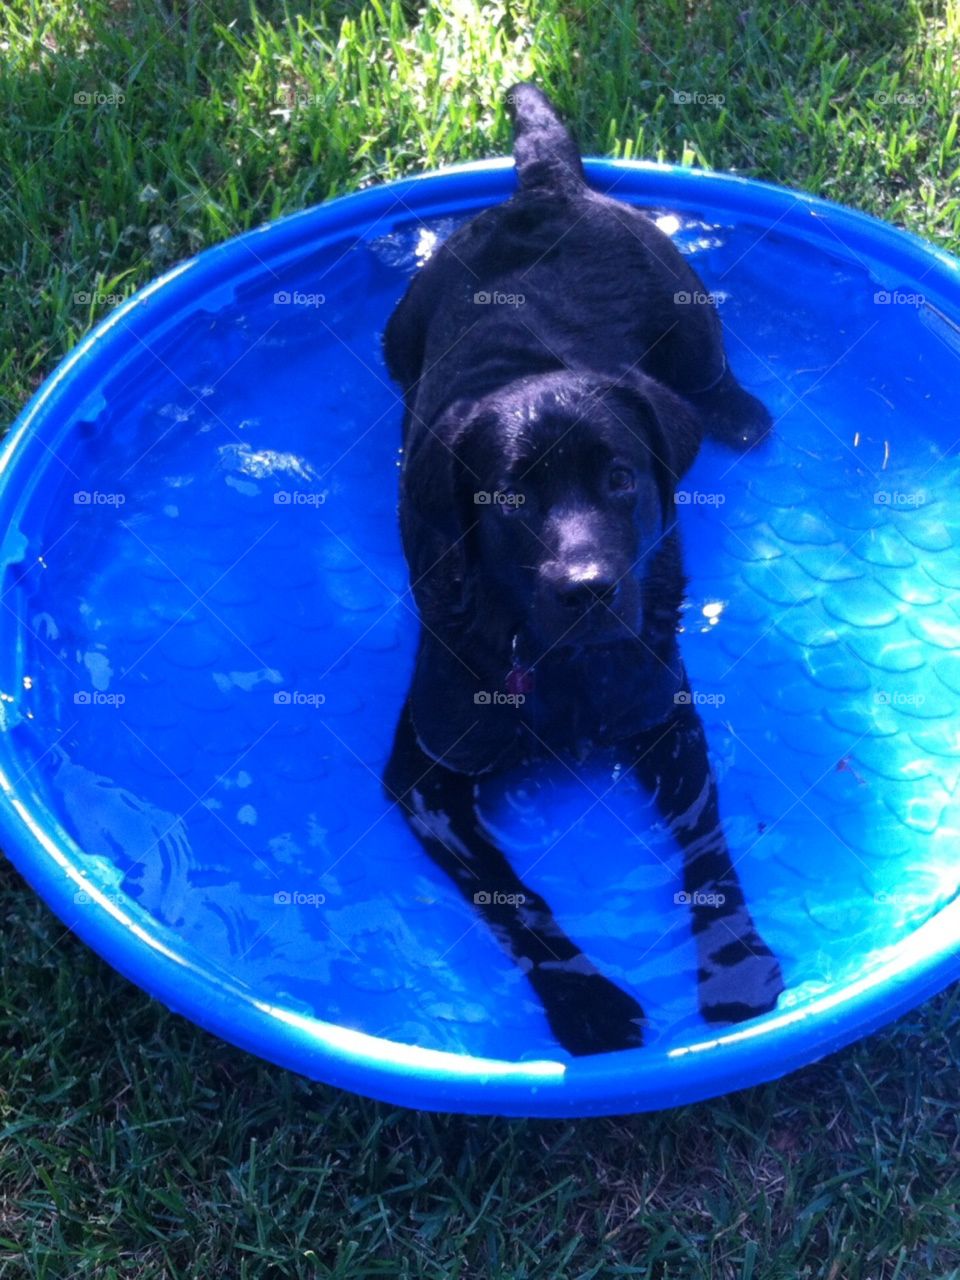 My pool
Black Labrador 
Wet Dog
Cool Dog
Don't even think about it
